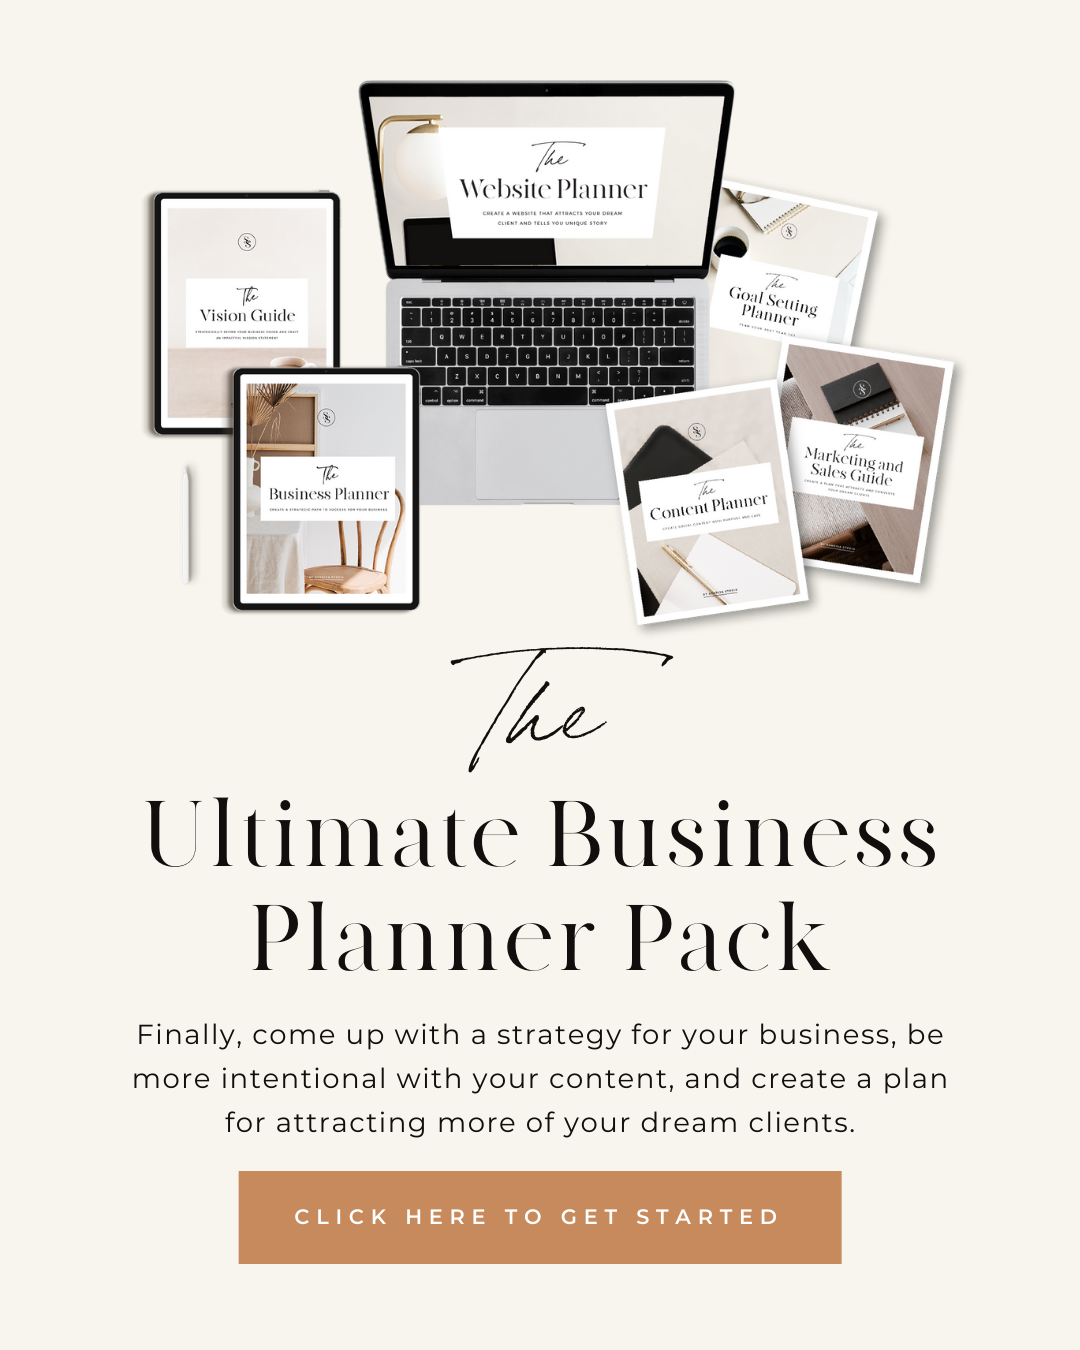 Get The Ultimate Planner Pack from Sonrisa Studio and take your brand to the next level.